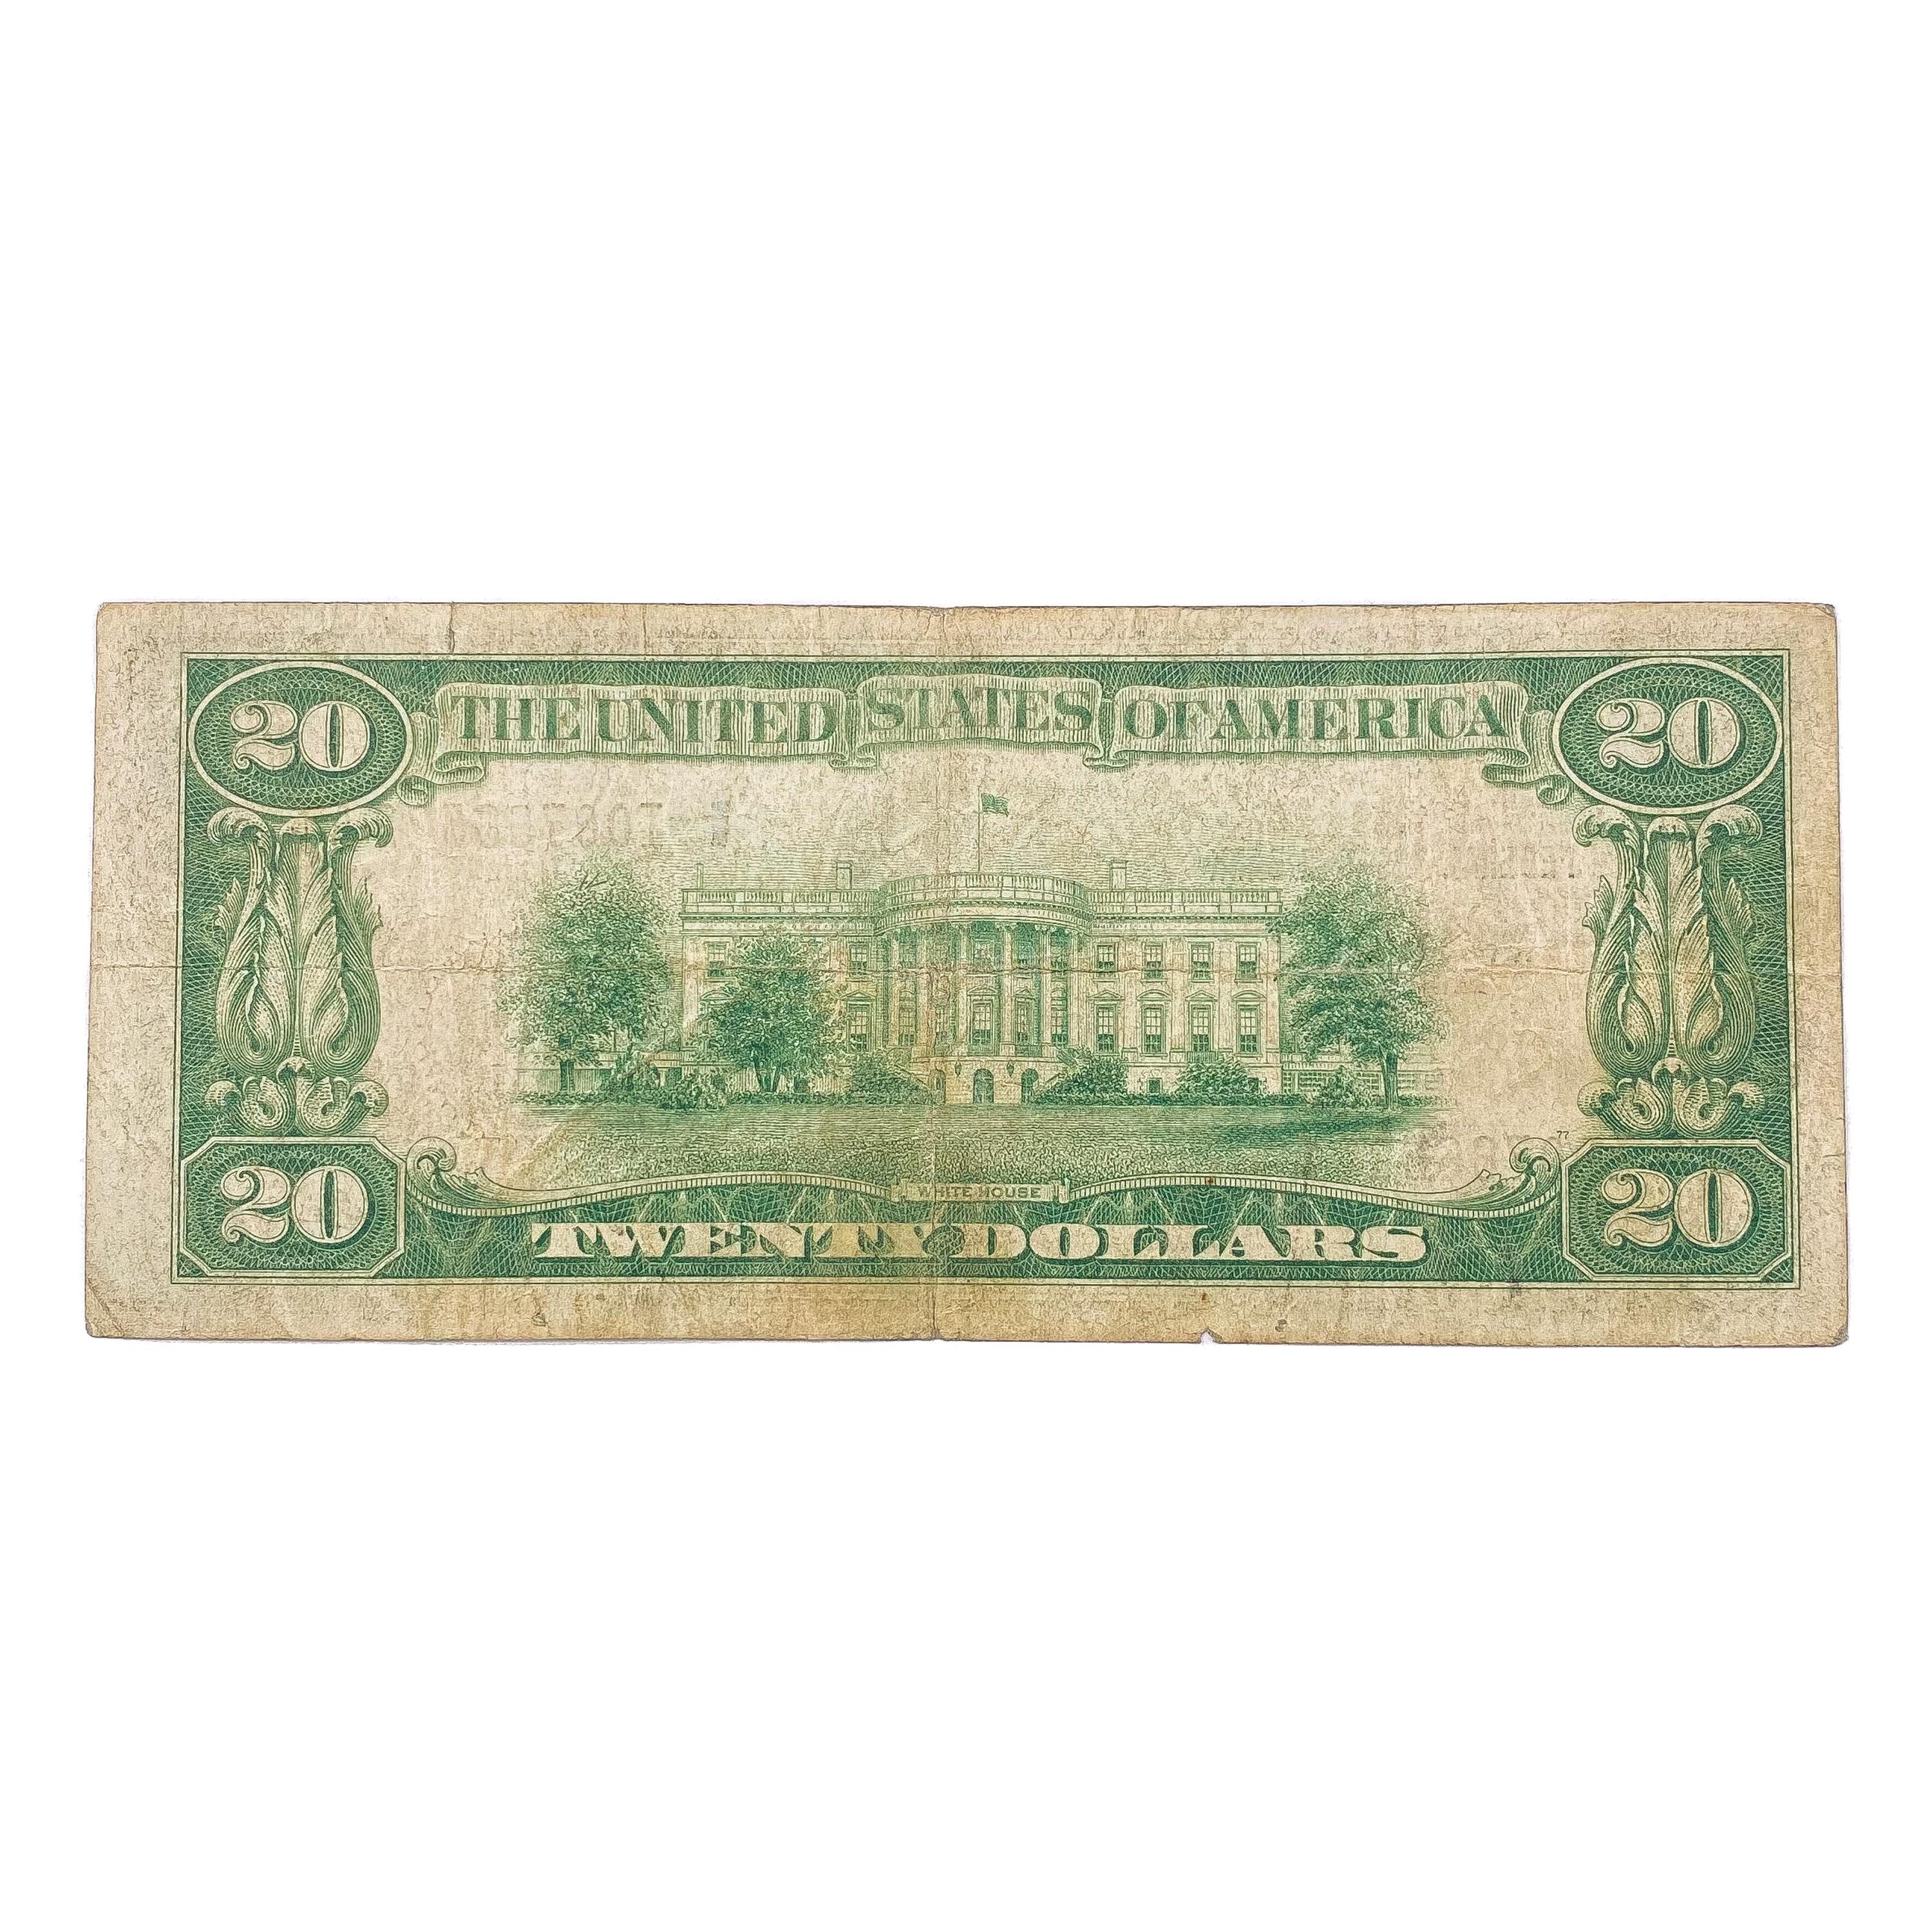 1929 $20 US MinneapolIs Bank, MO Fed Res Note